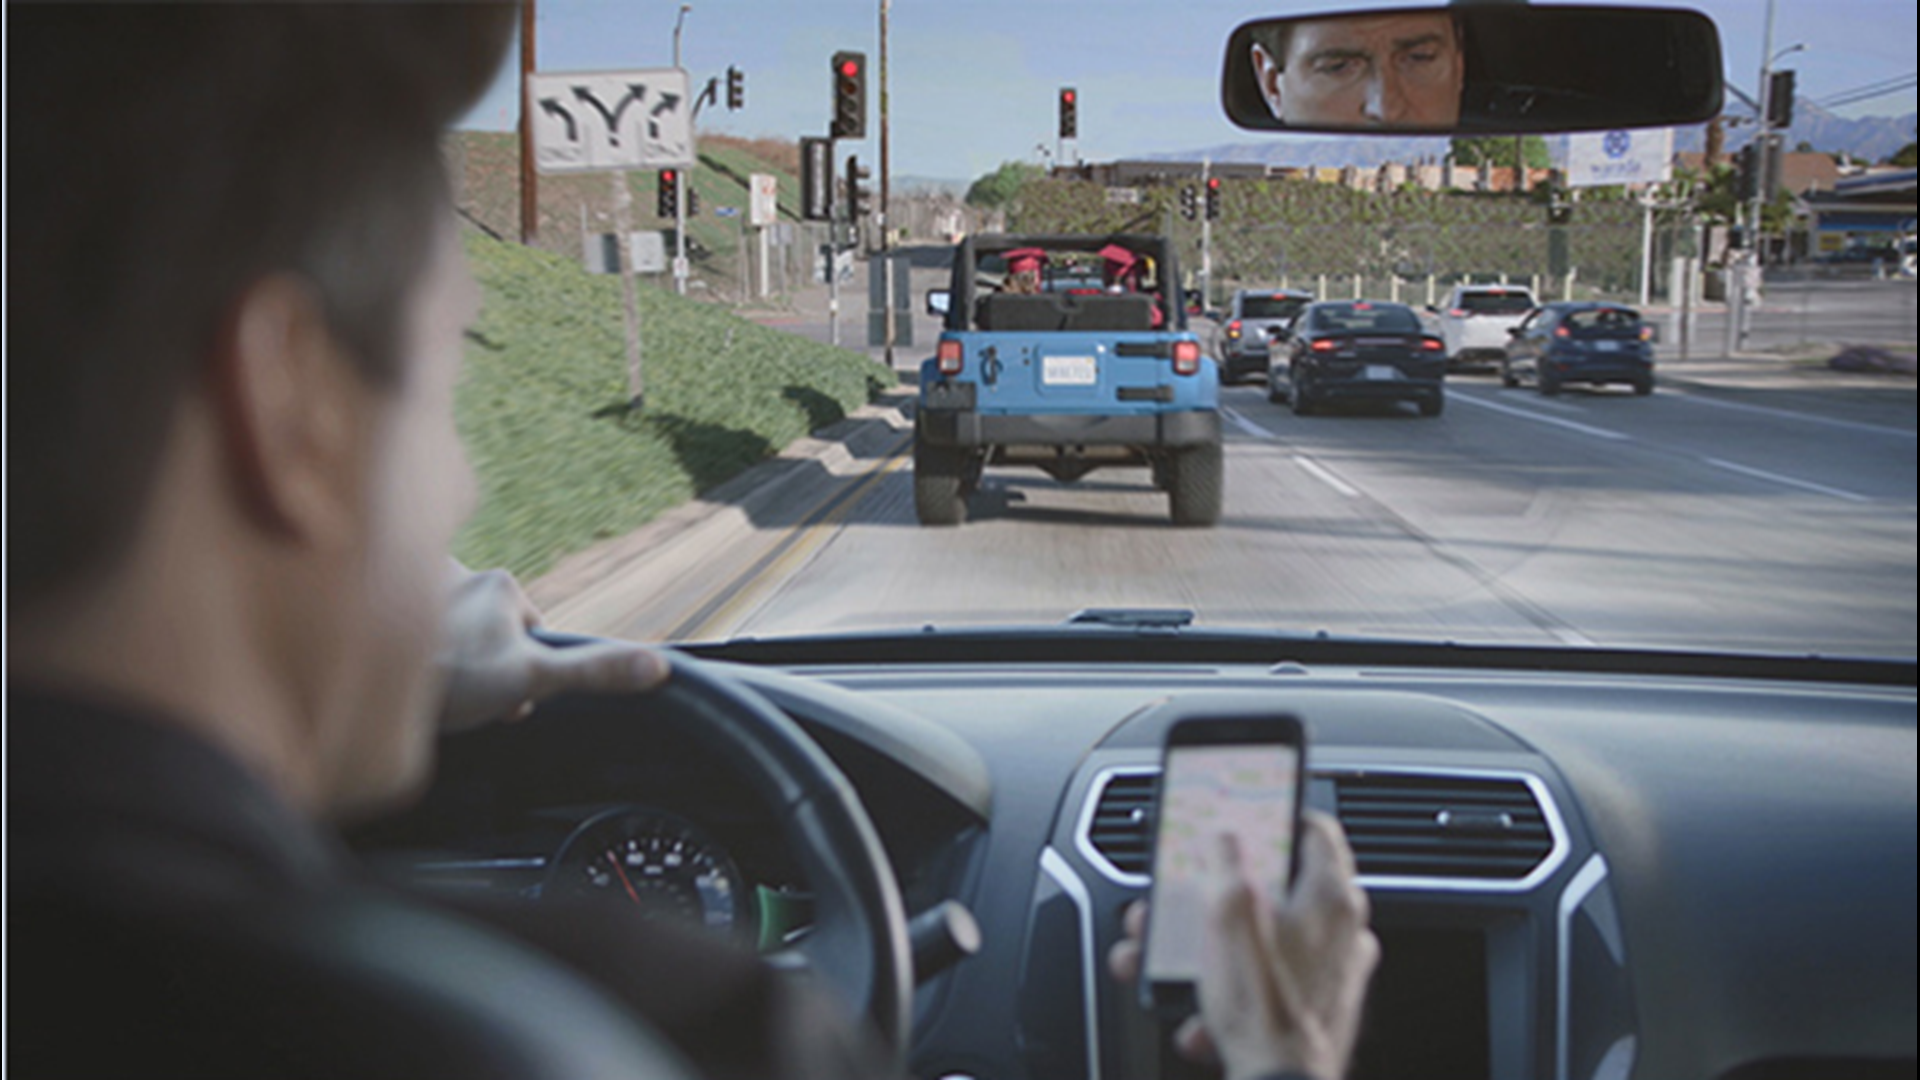 A newly released AAA survey revealed more drivers are choosing to put down their devices when they're behind the wheel because of certain influencers.